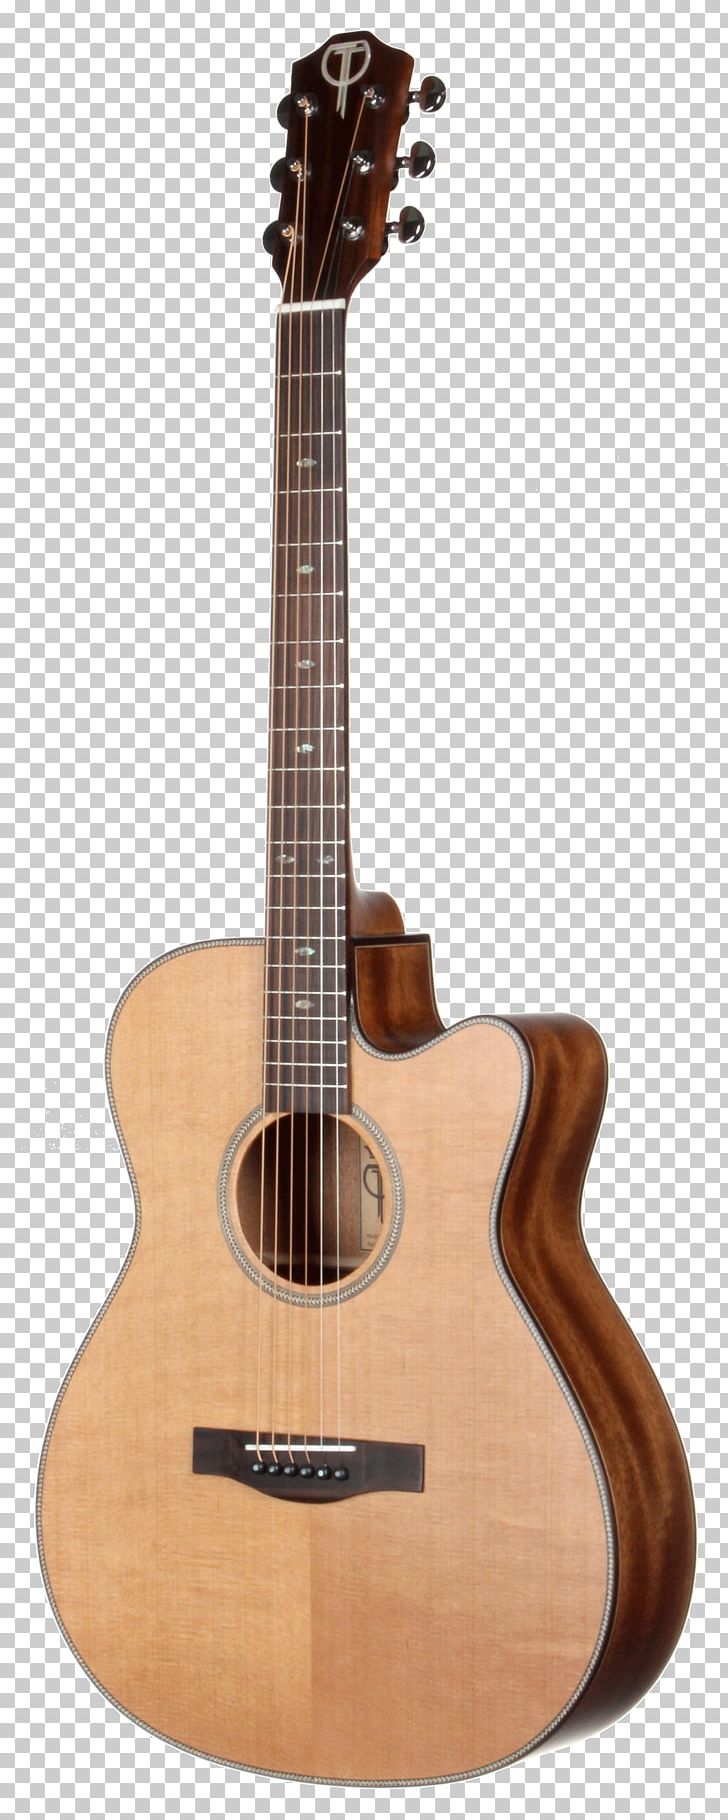 Acoustic Guitar Dreadnought Musical Instruments String Instruments PNG, Clipart, Cuatro, Cutaway, Epiphone, Guitar Accessory, Music Free PNG Download